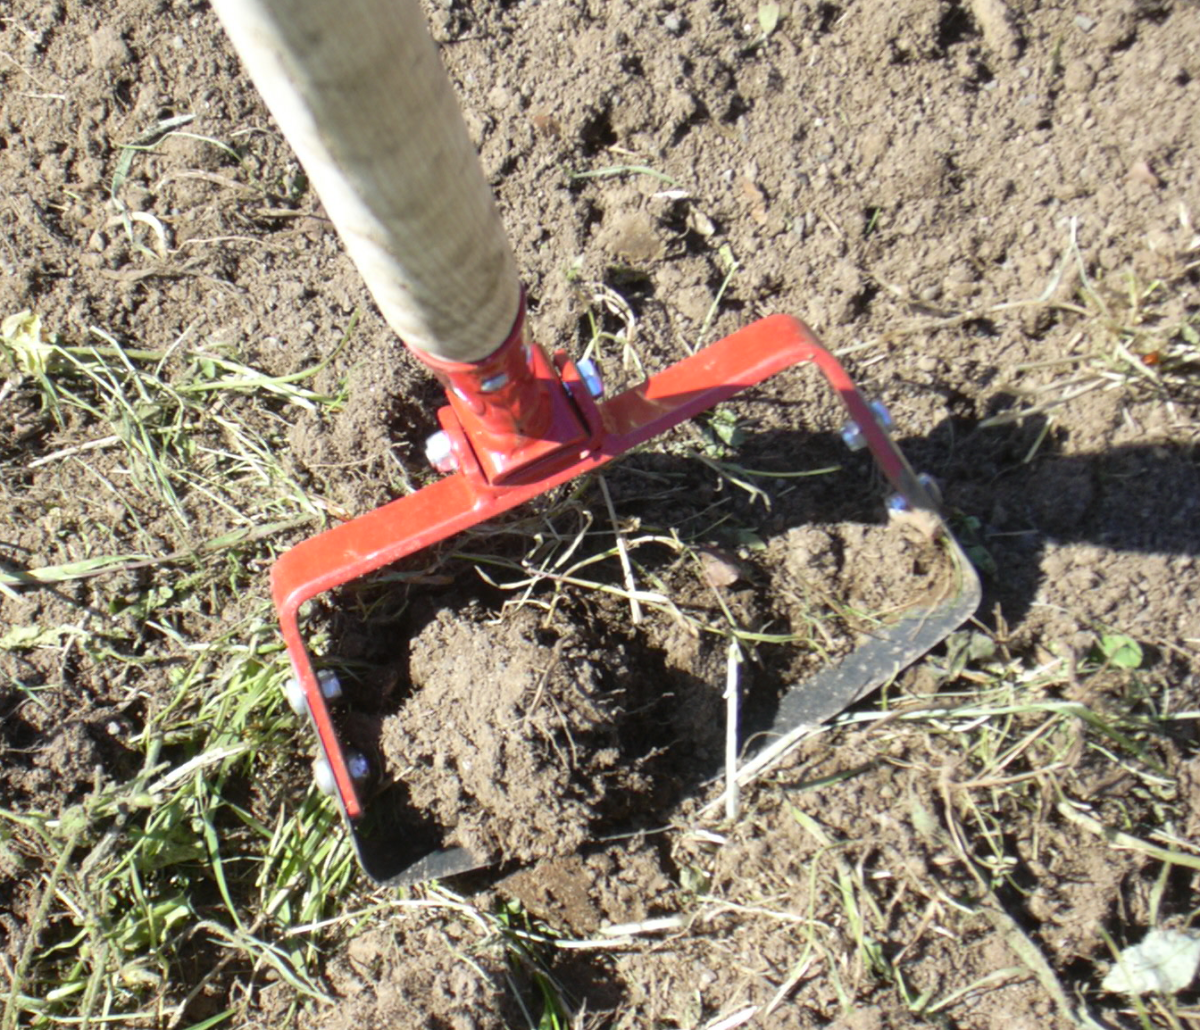 I used manual tools like this loop weeder to remove the grassy sod and create a nice garden plot for vegetables.